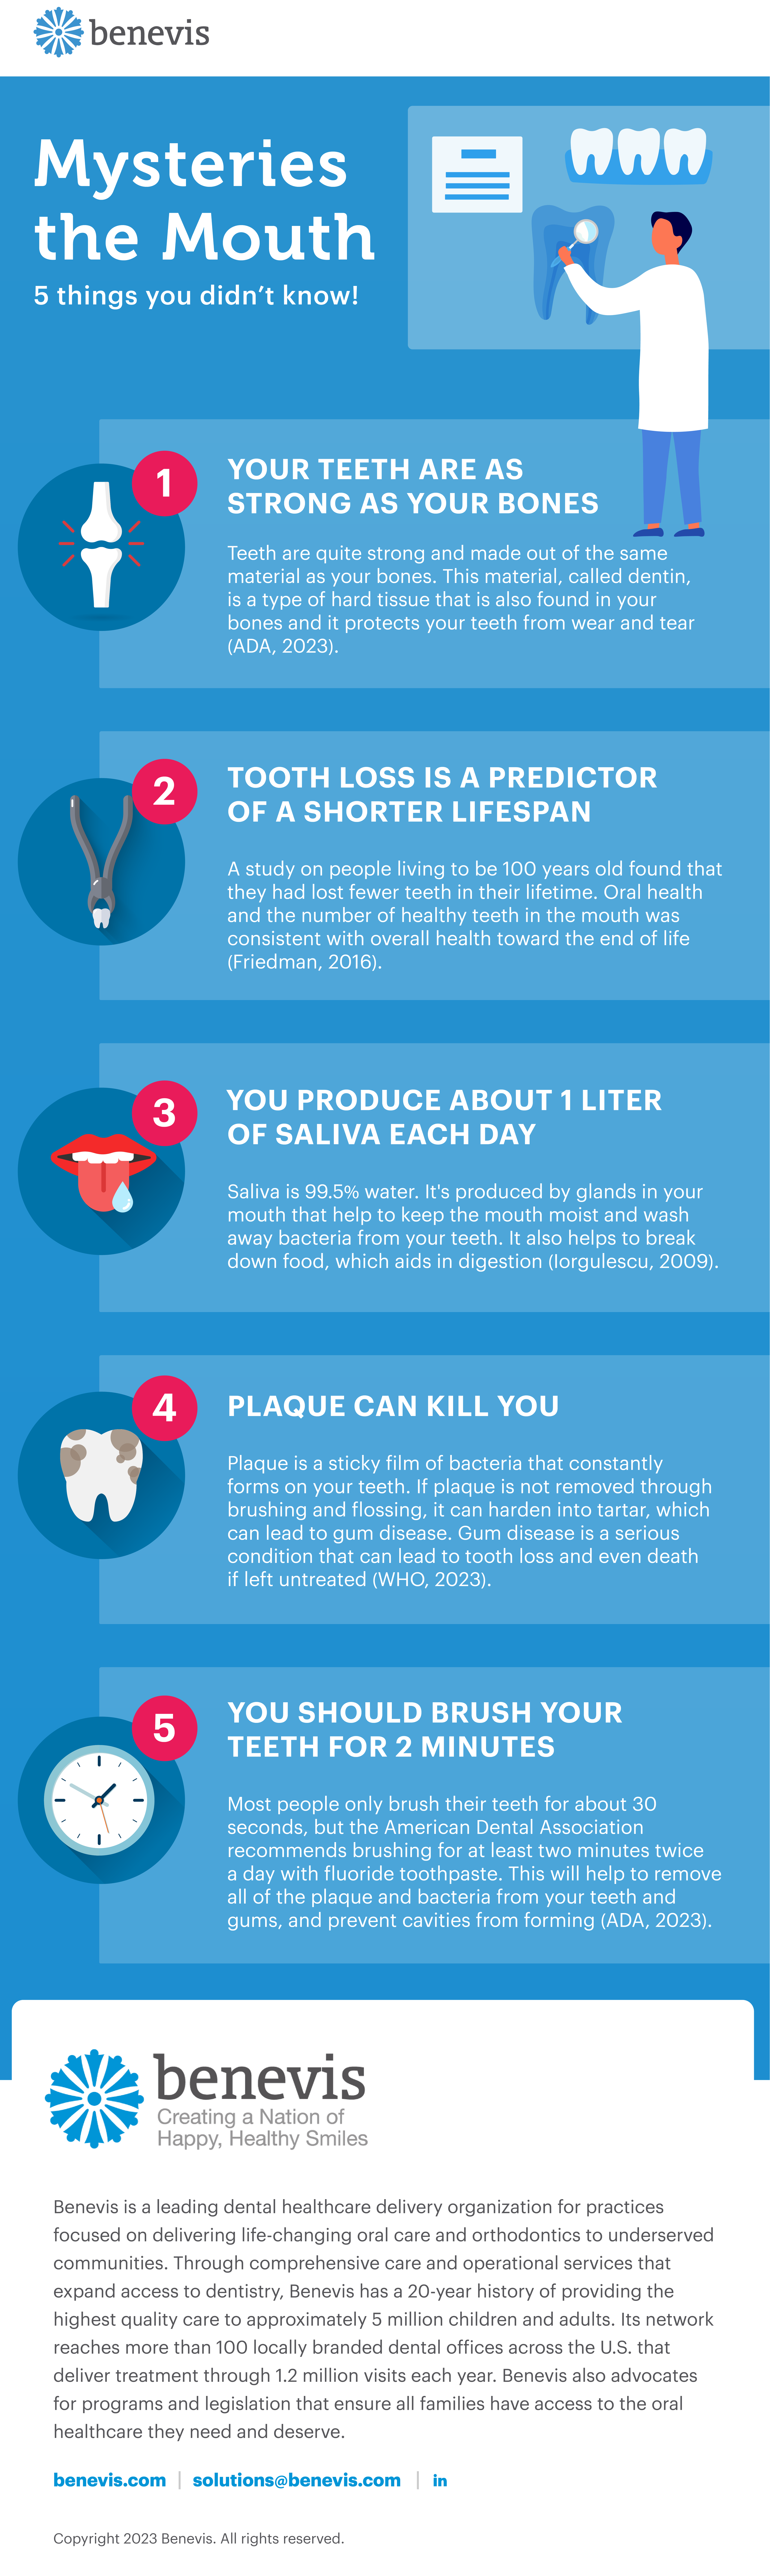 Benevis_mysteries-of-the-mouth-infographic_FINAL_infographic-2